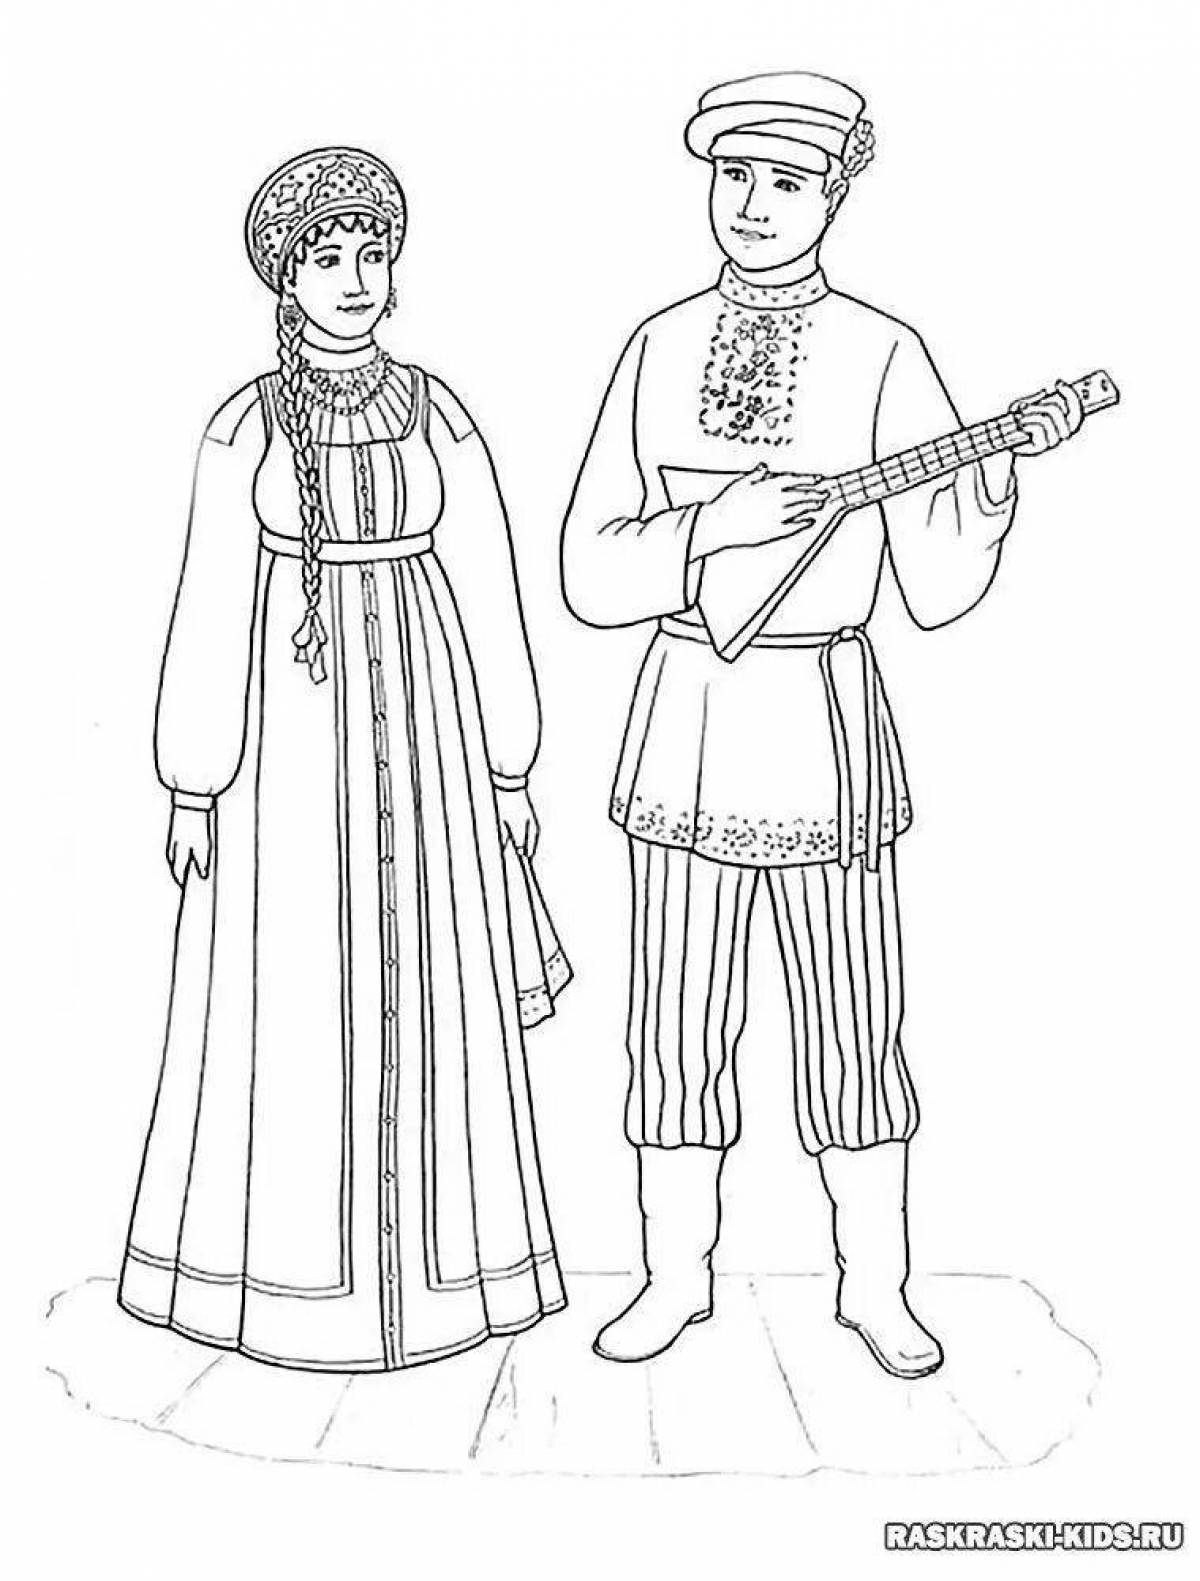 Traditional costumes of Russian people